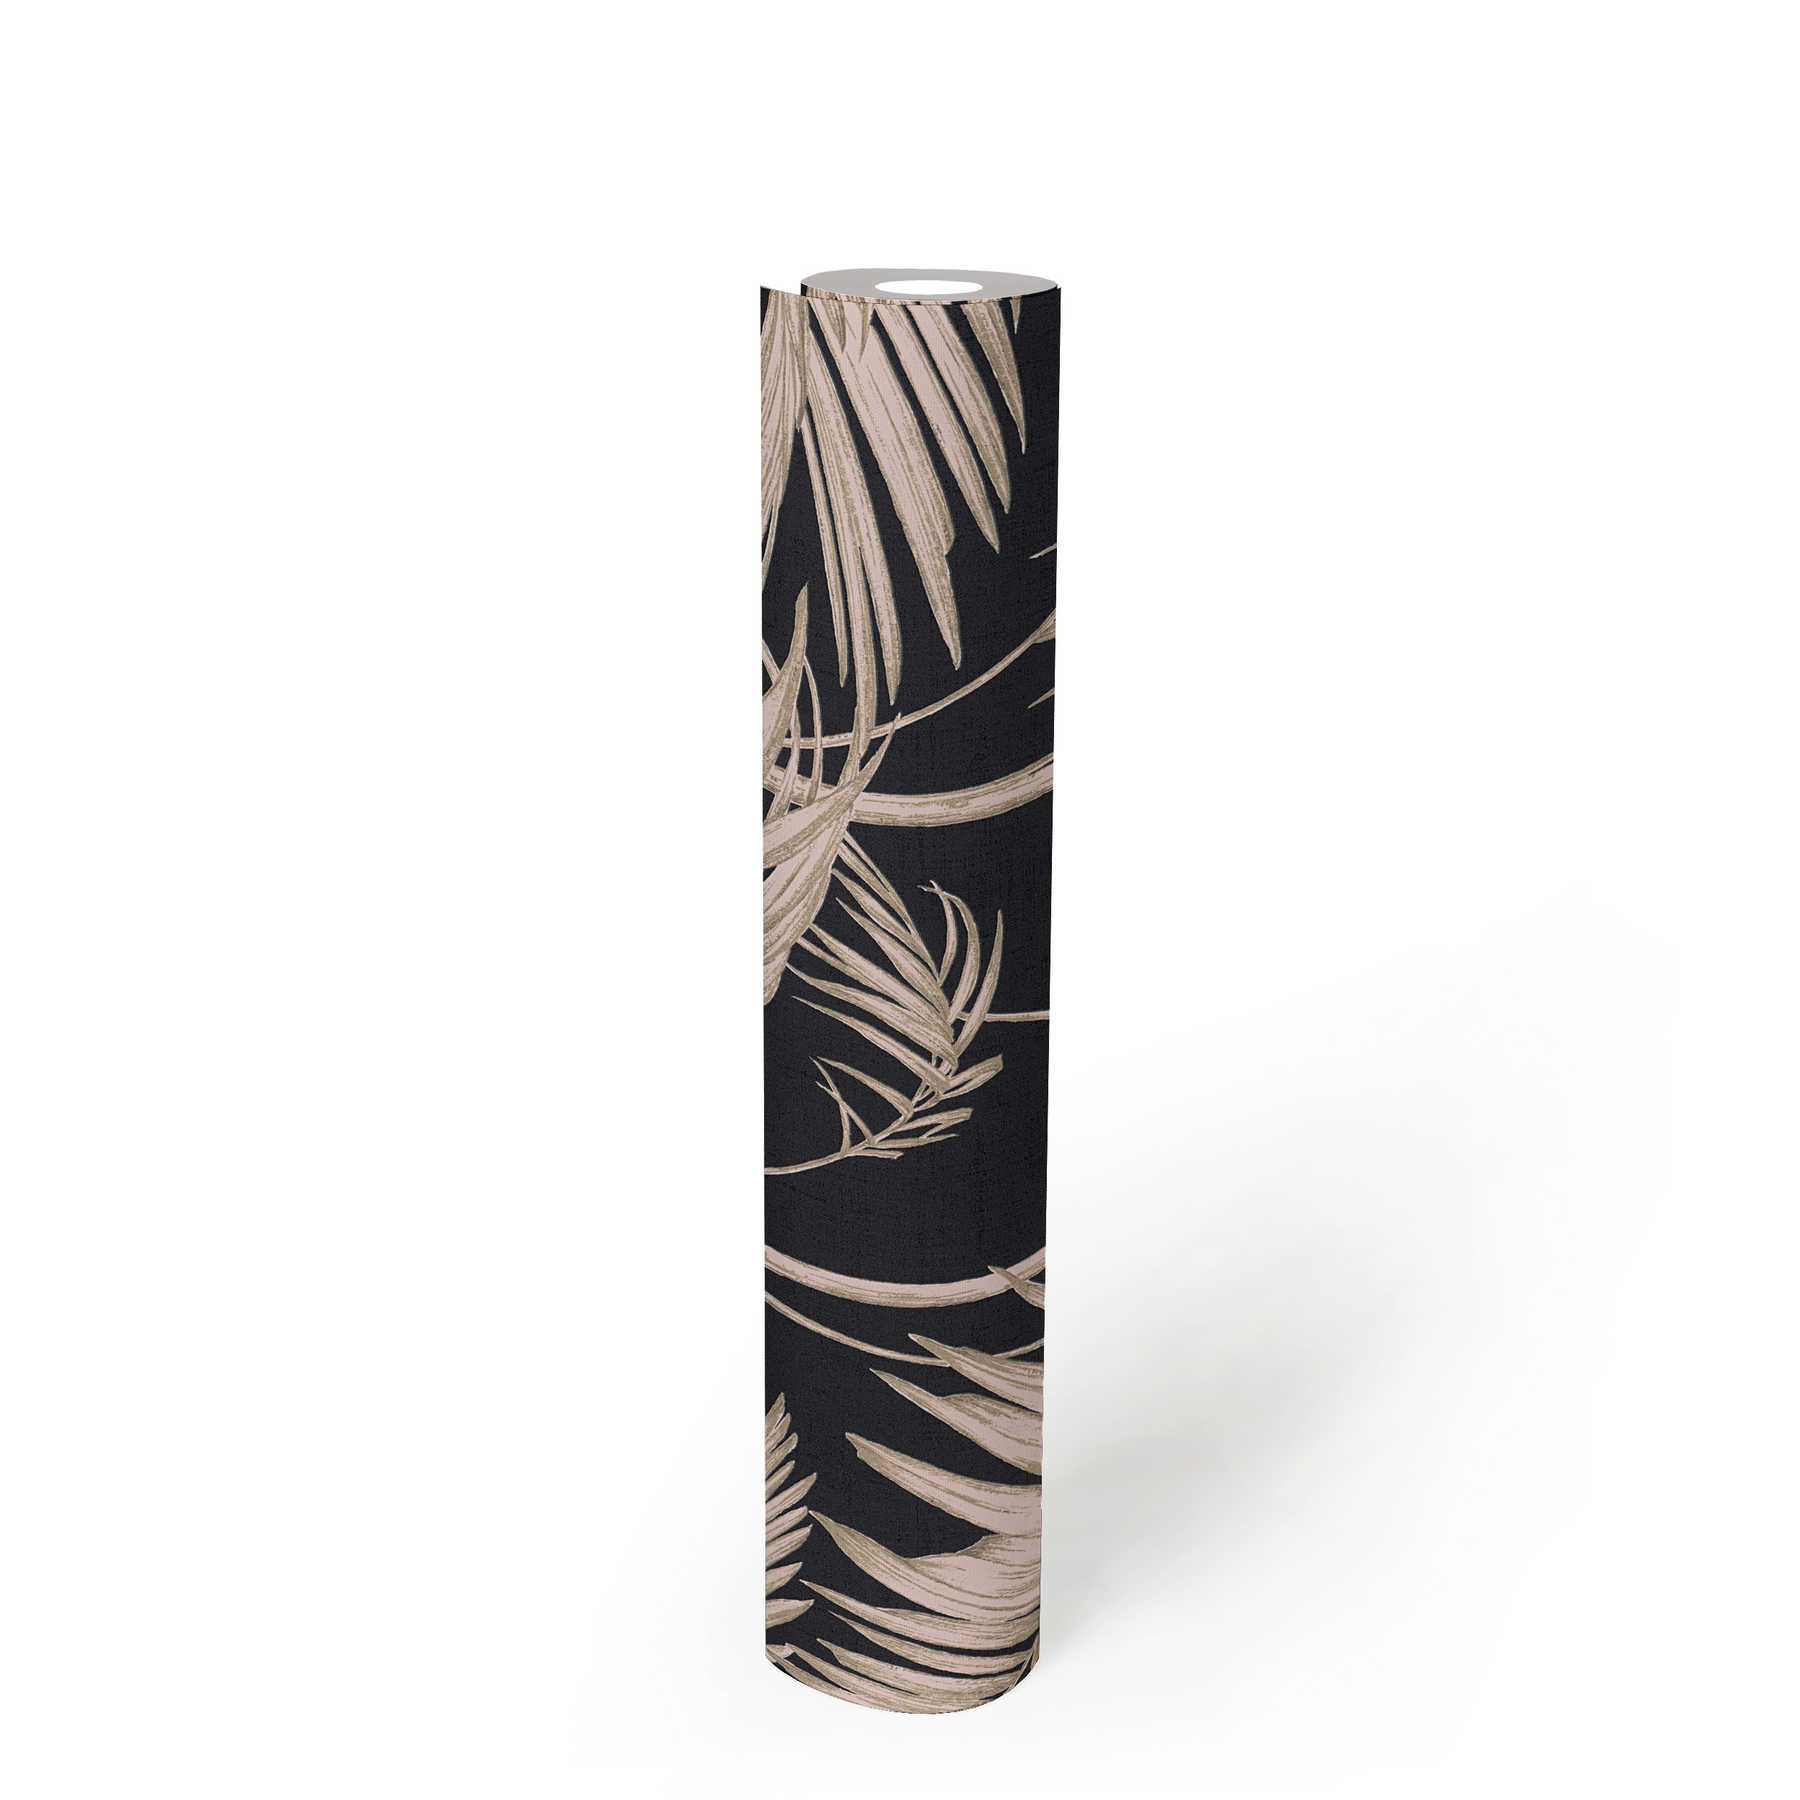             Nature wallpaper palm leaves, bamboo - pink, bronze, black
        